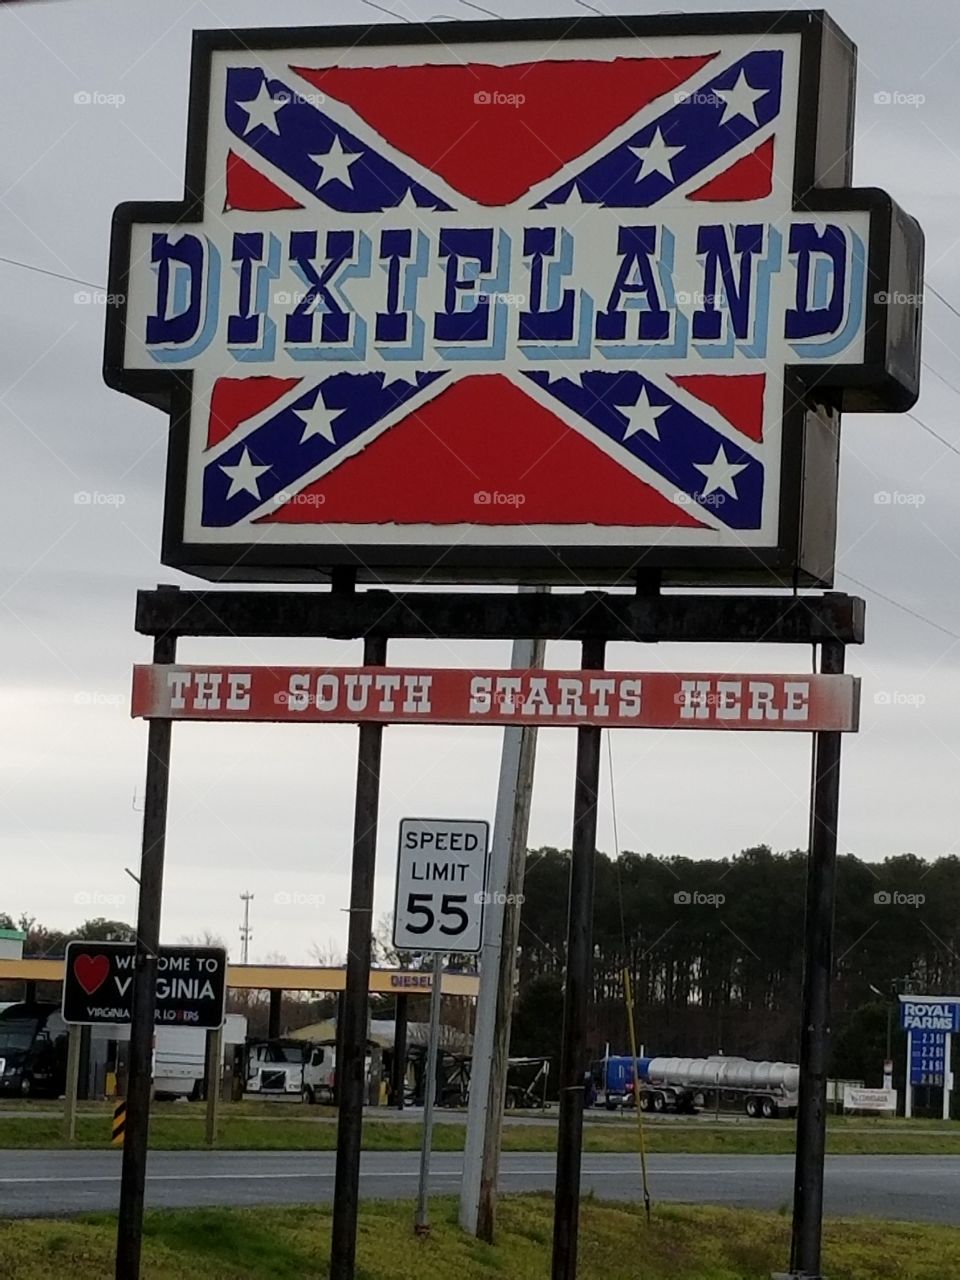 Dixieland sign at the eastern shore of Maryland /Virginia state line on route 13 south